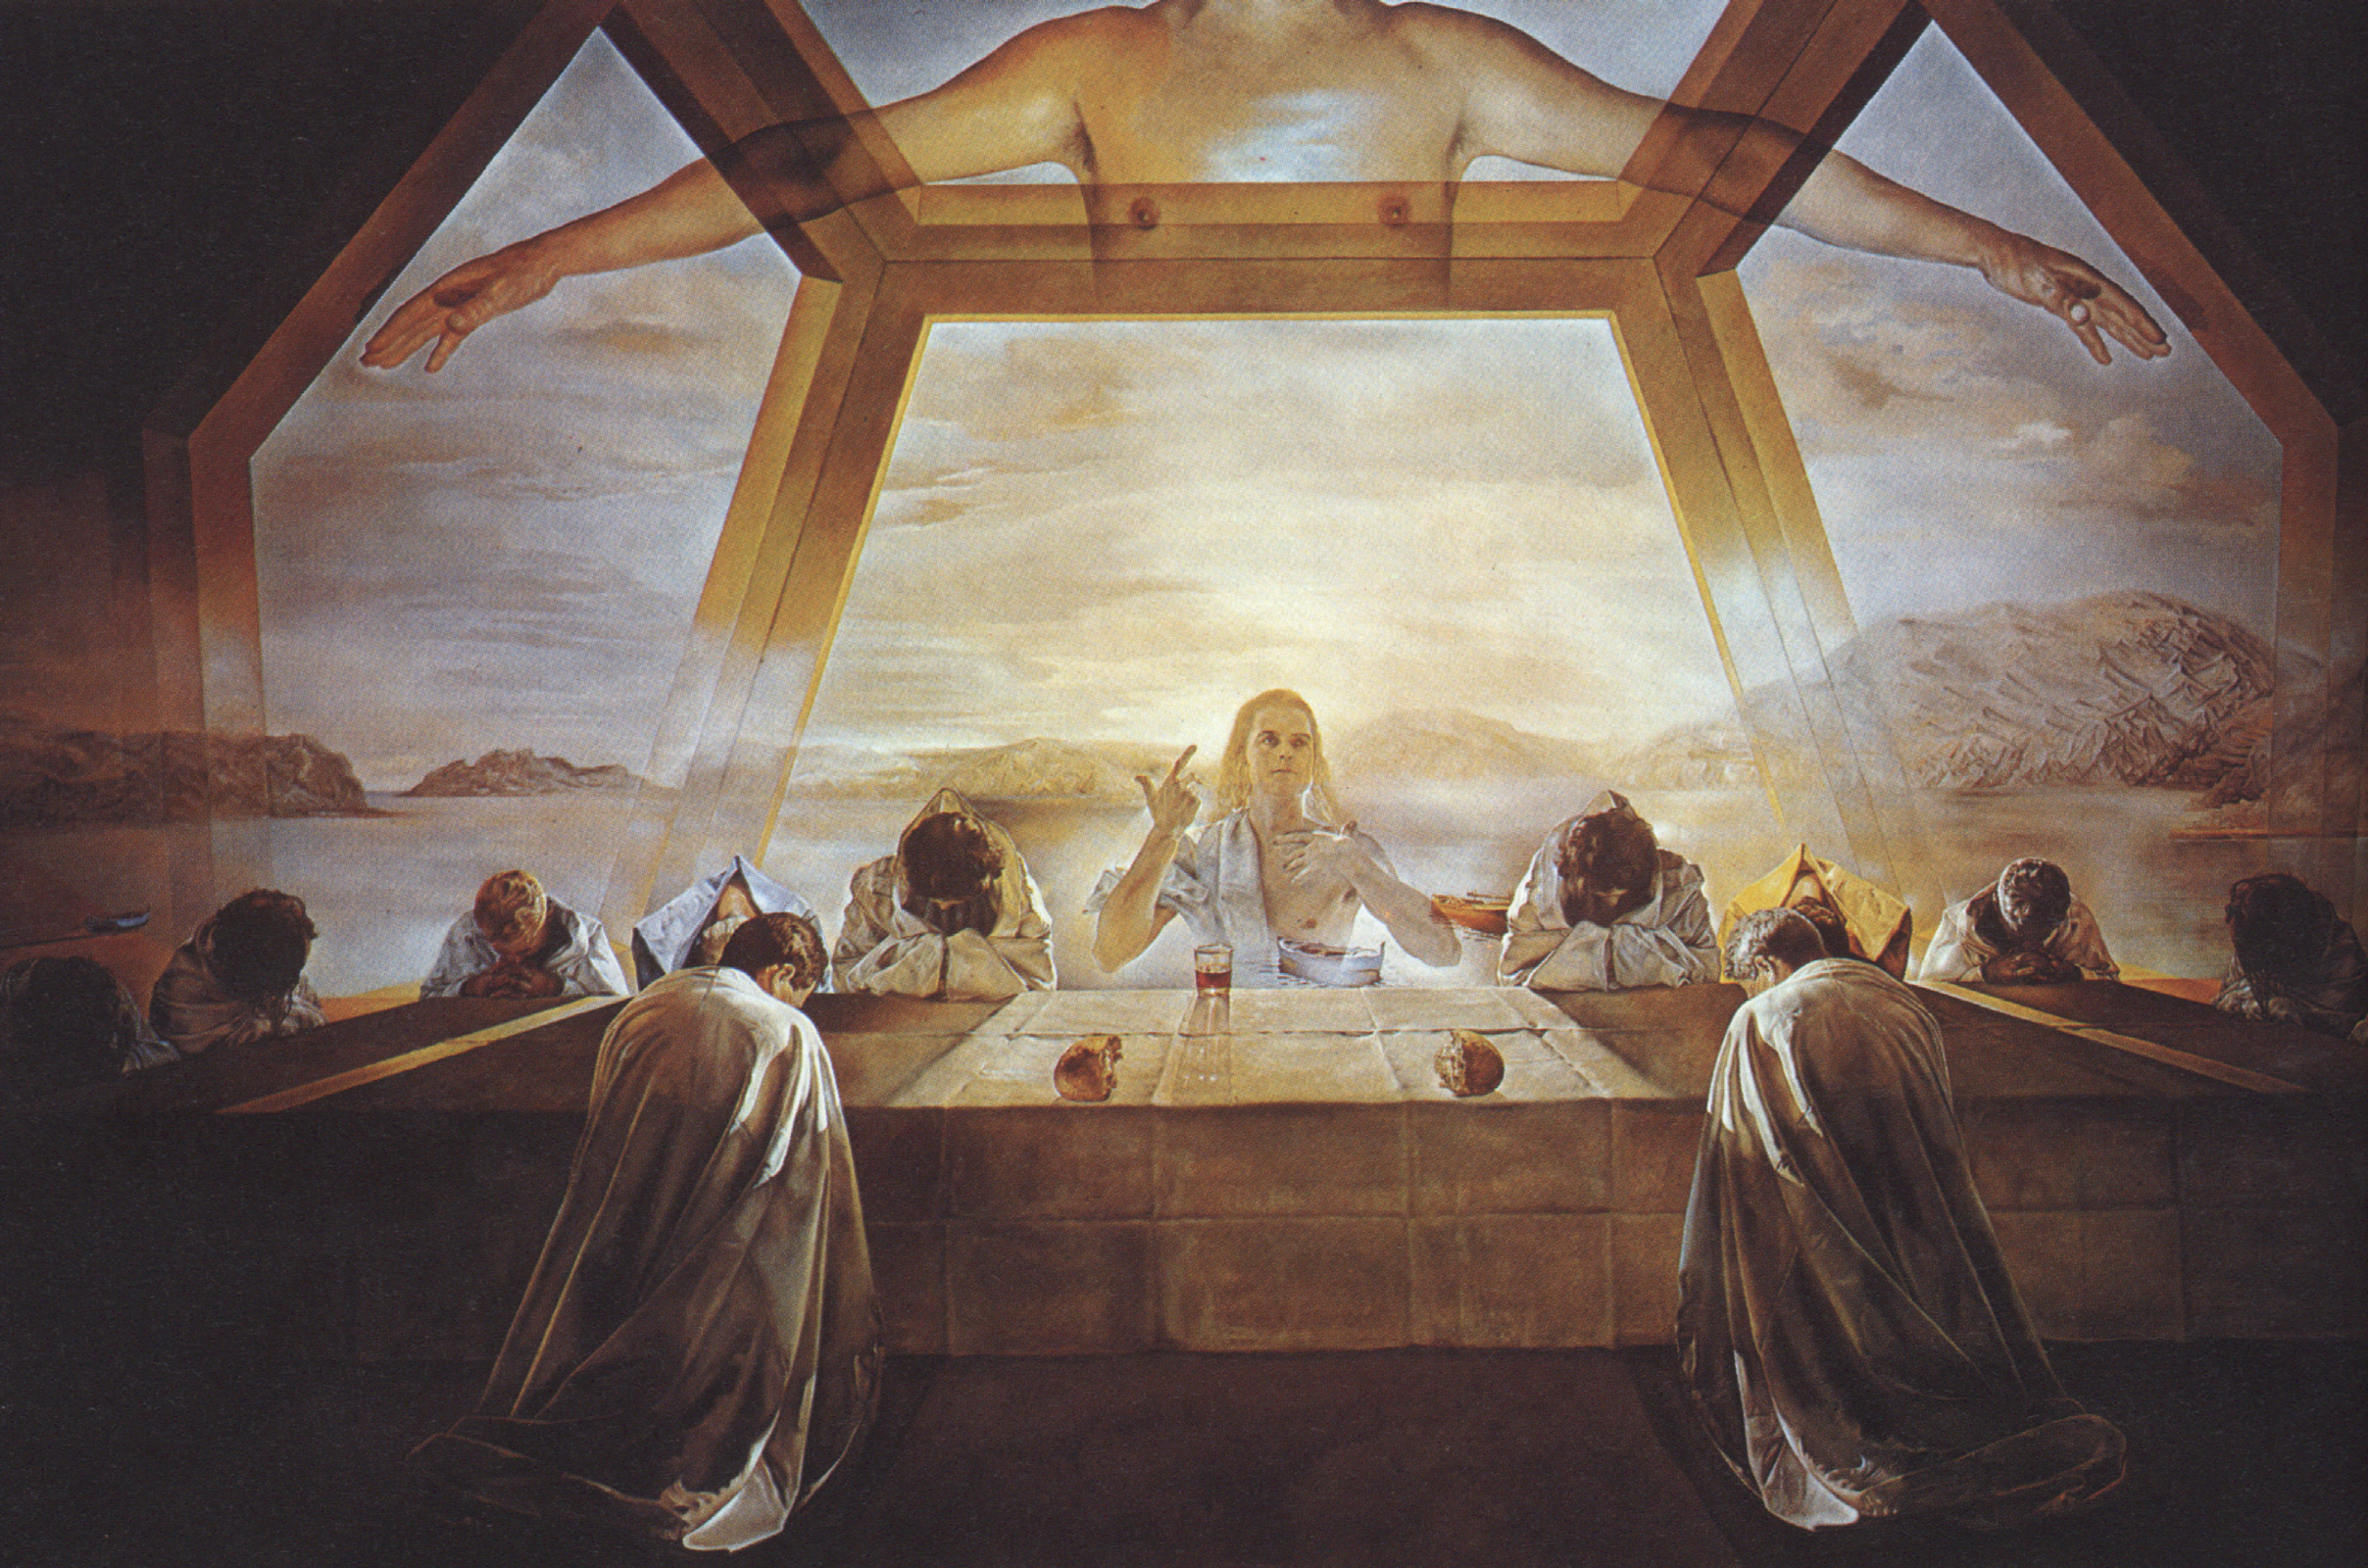 The Sacrament of the Last Supper (1955).